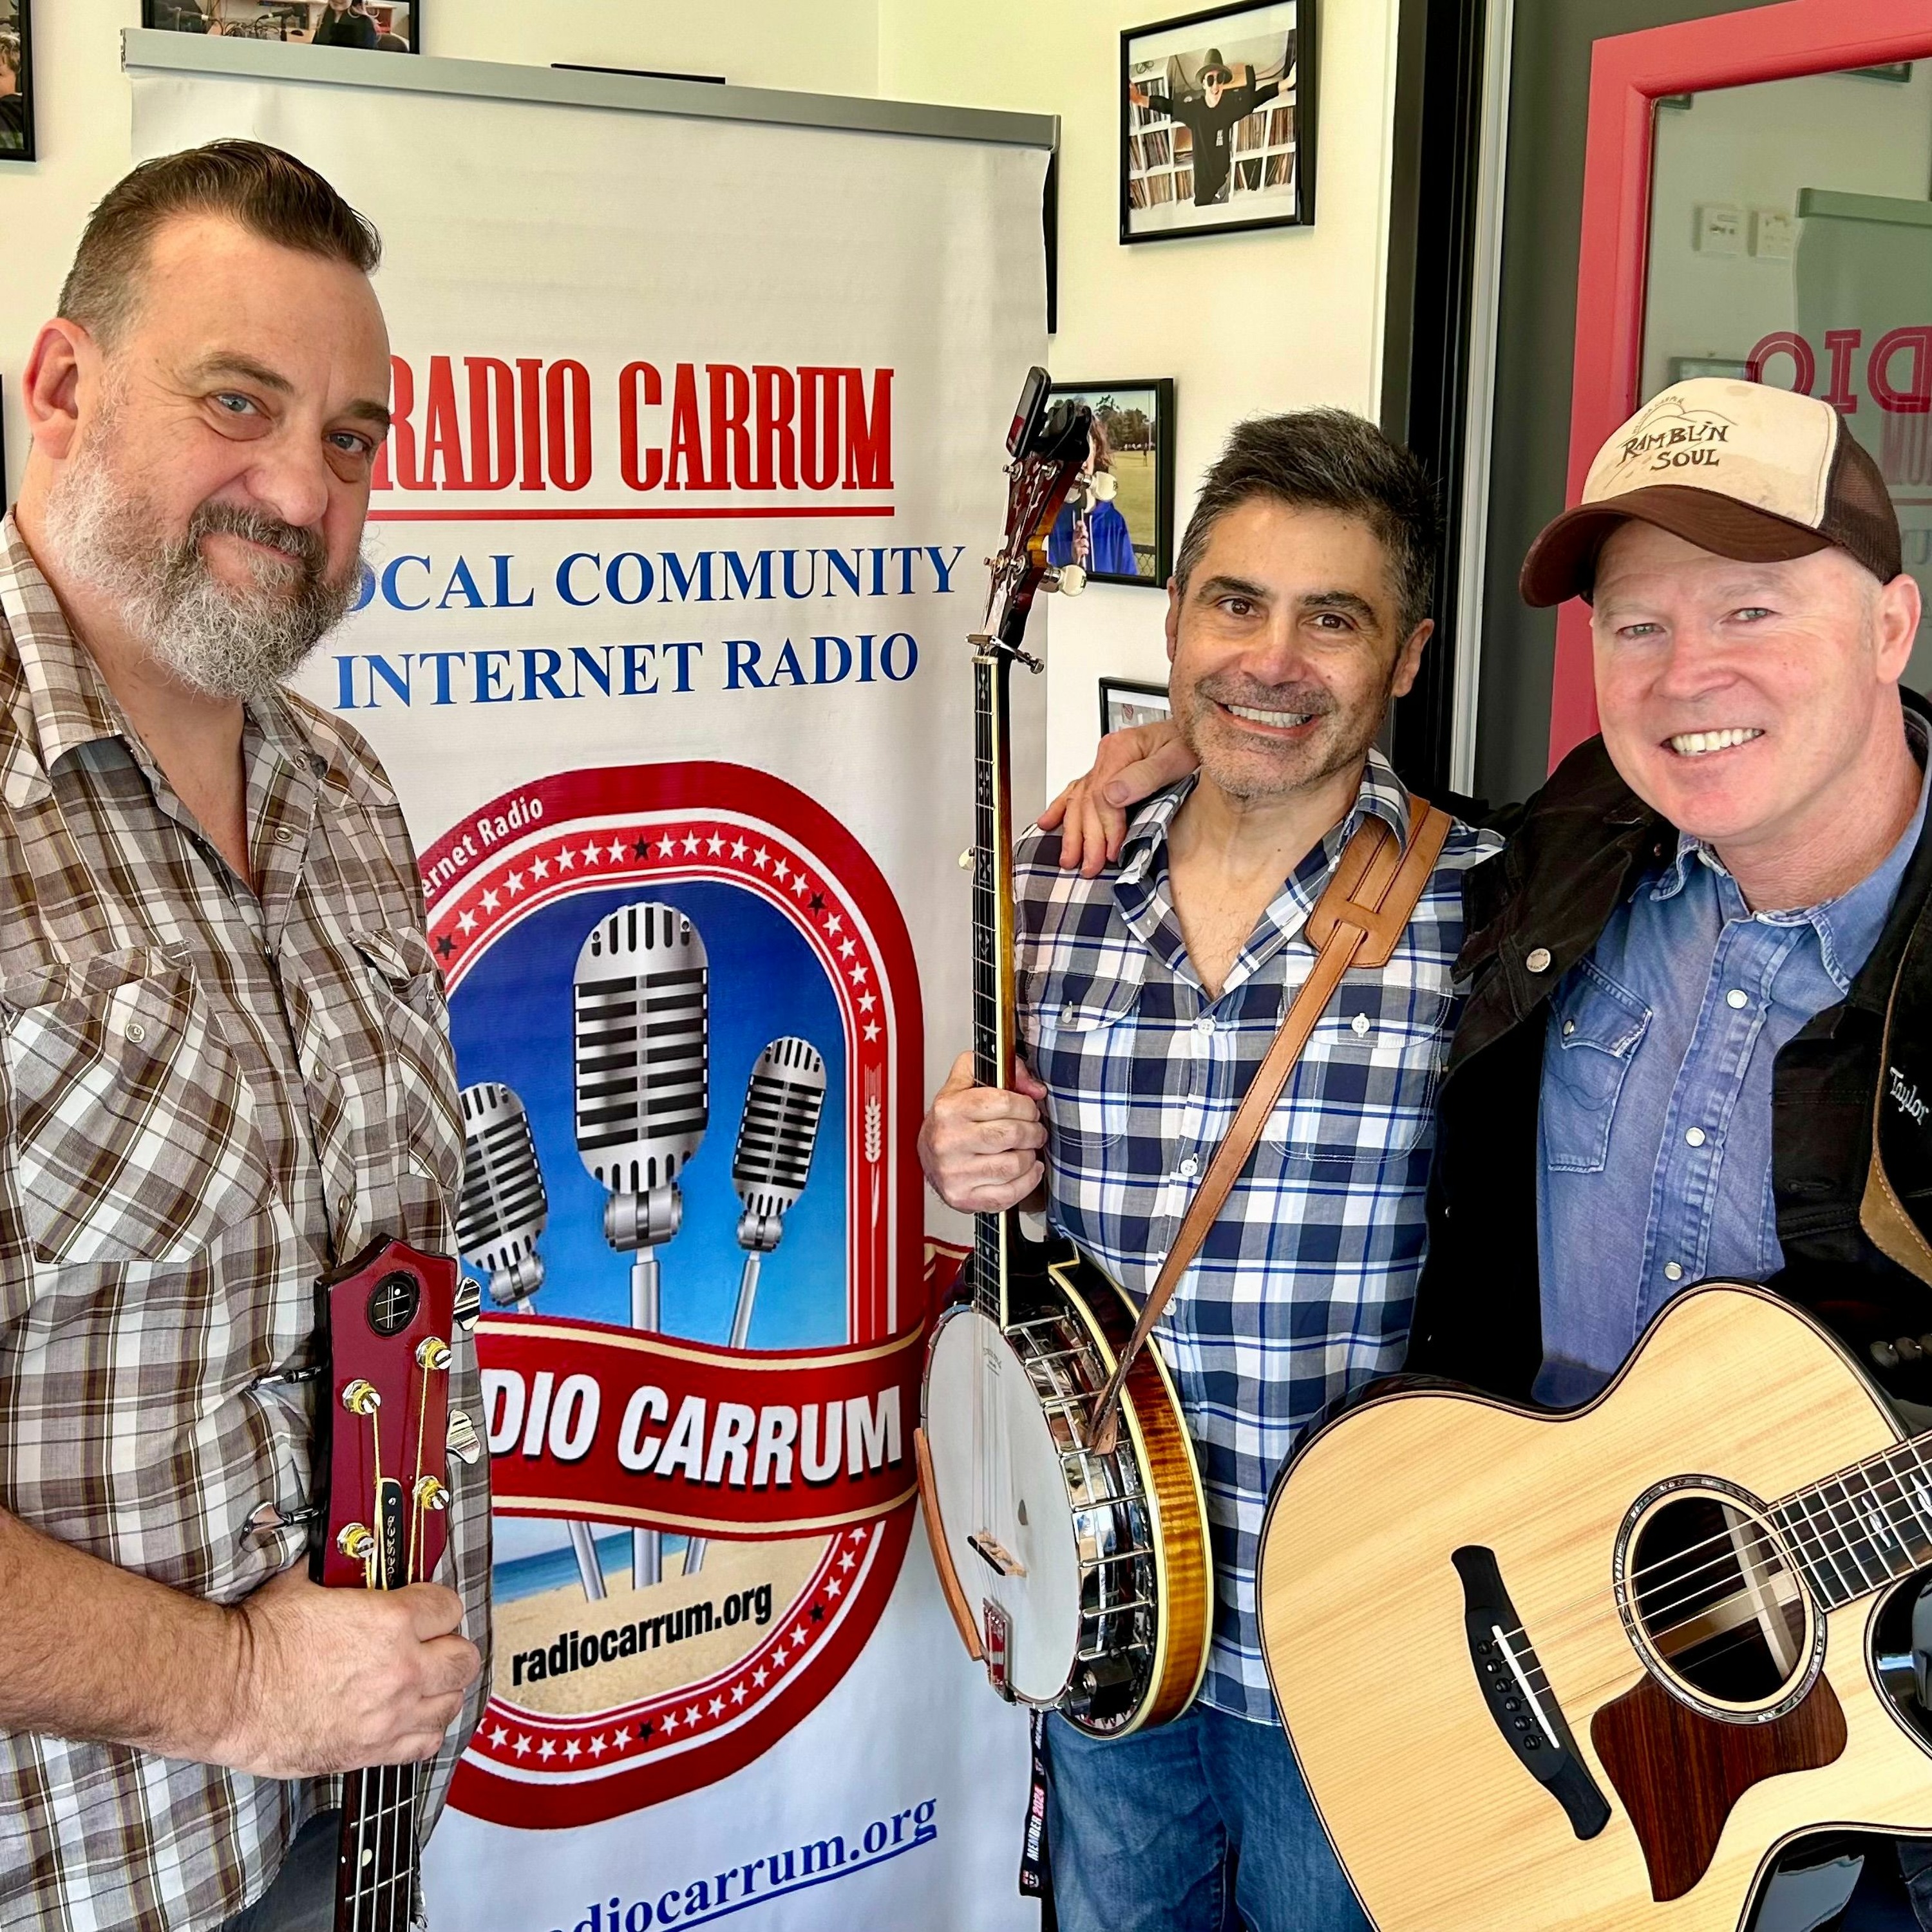 Sunday Morning - The Distant South - Live At Radio Carrum